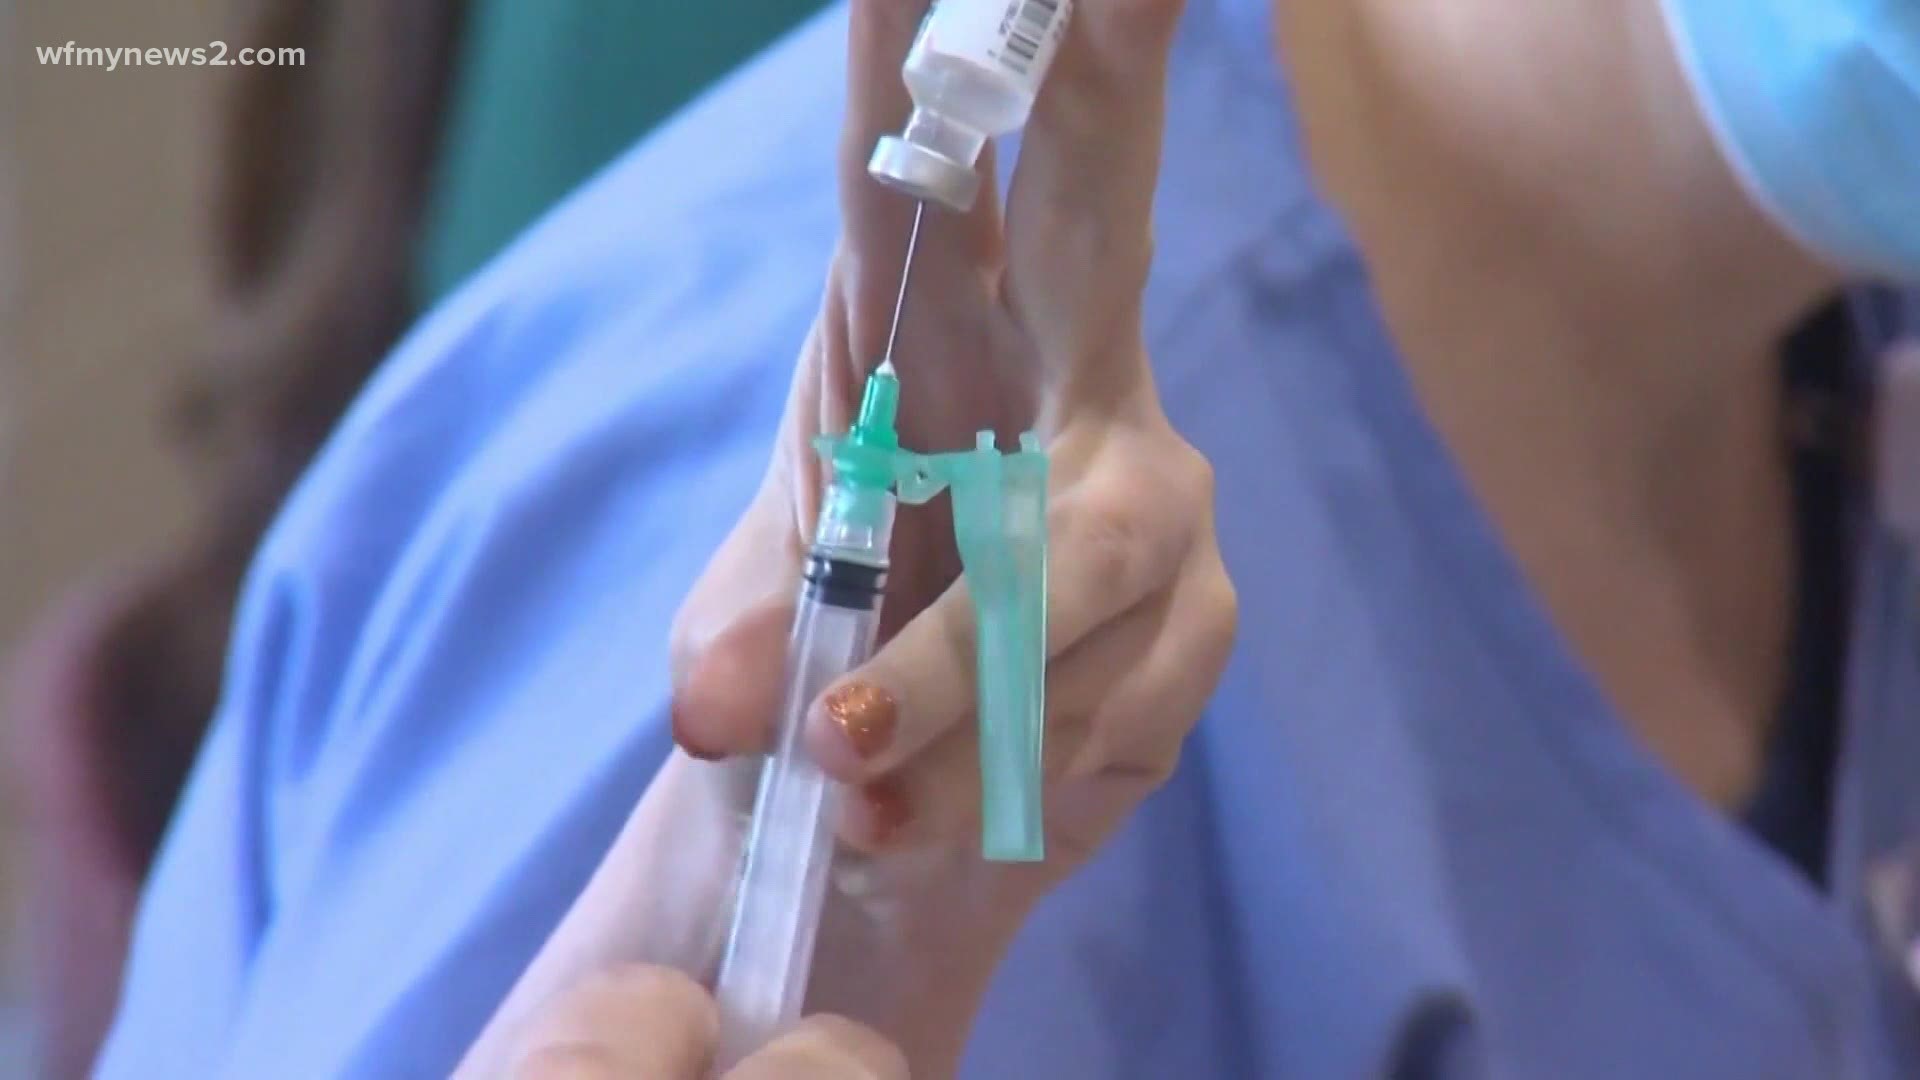 Experts said if we can get more people to get their vaccine, it will help keep the newest COVID variant at bay.